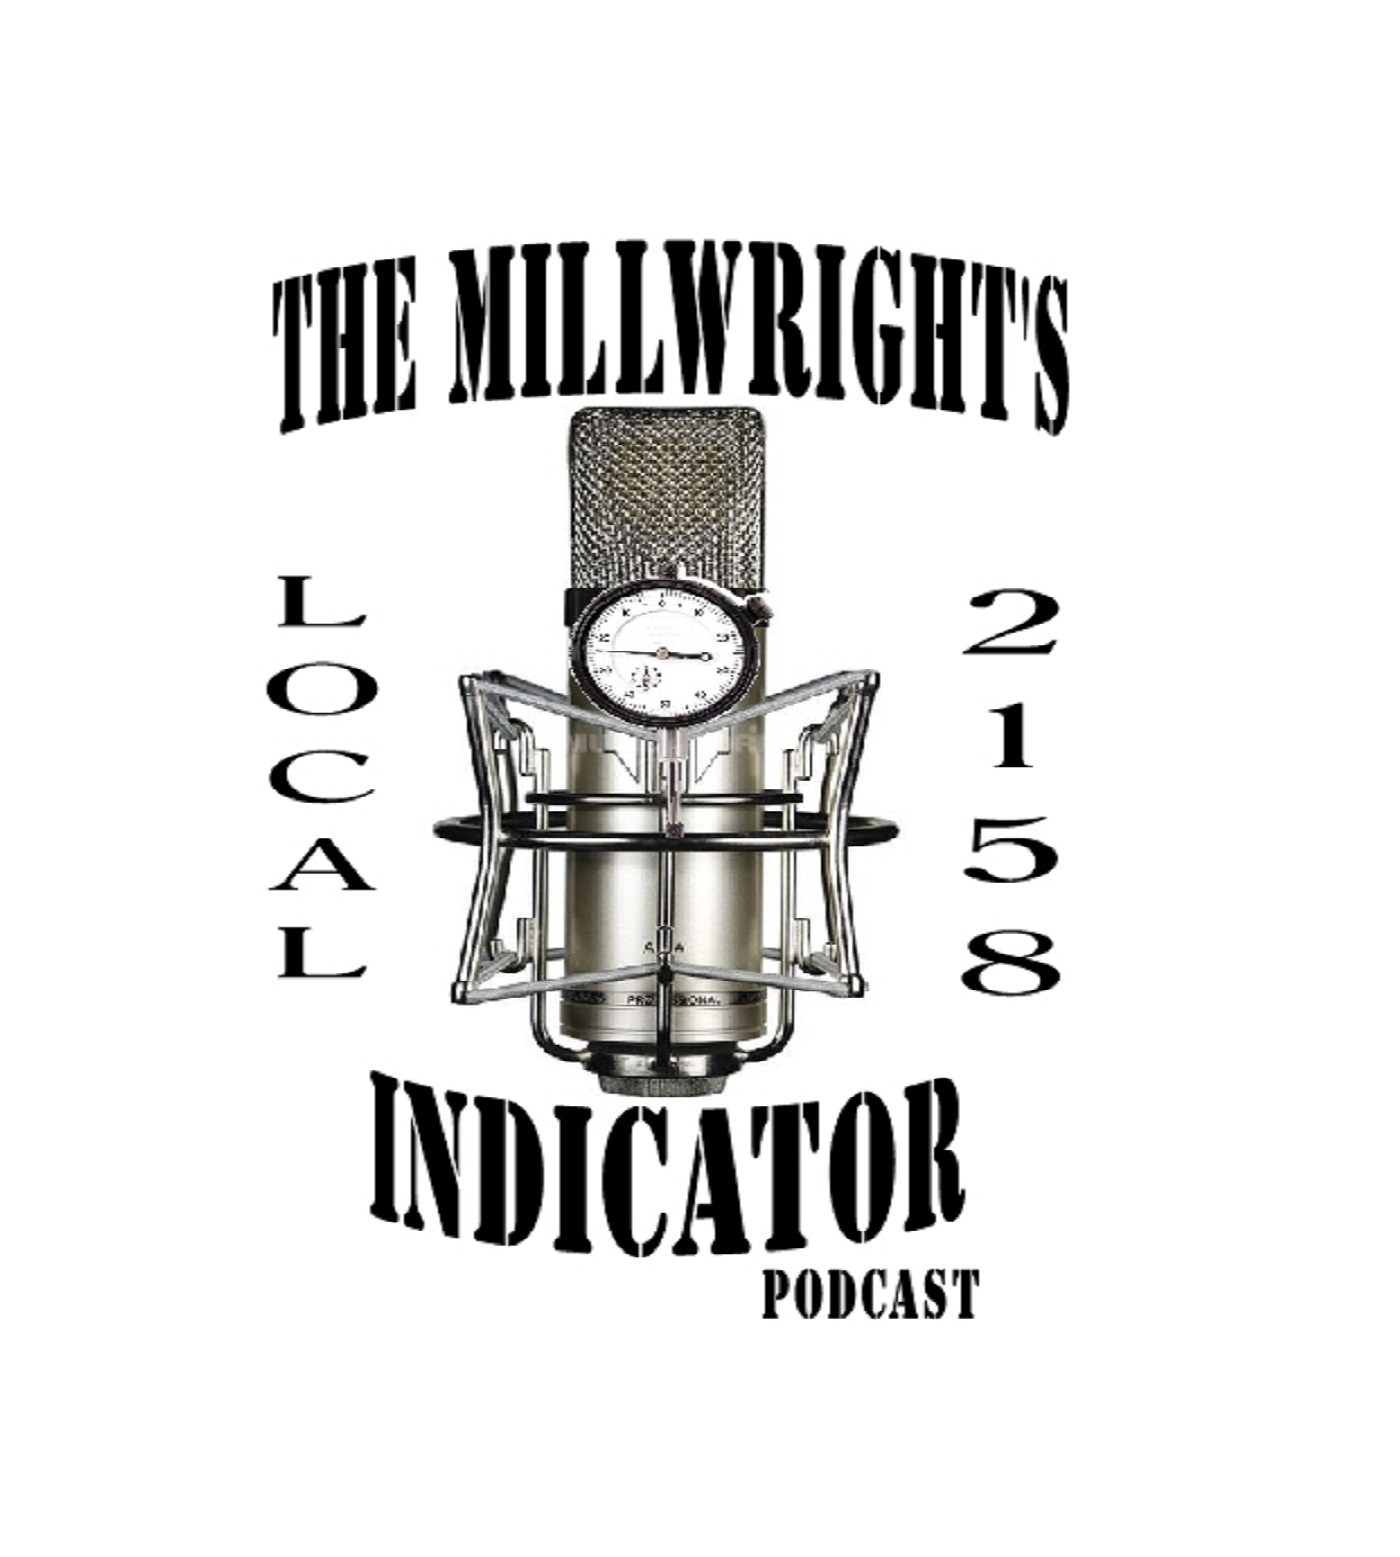 The Millwrights Indicator